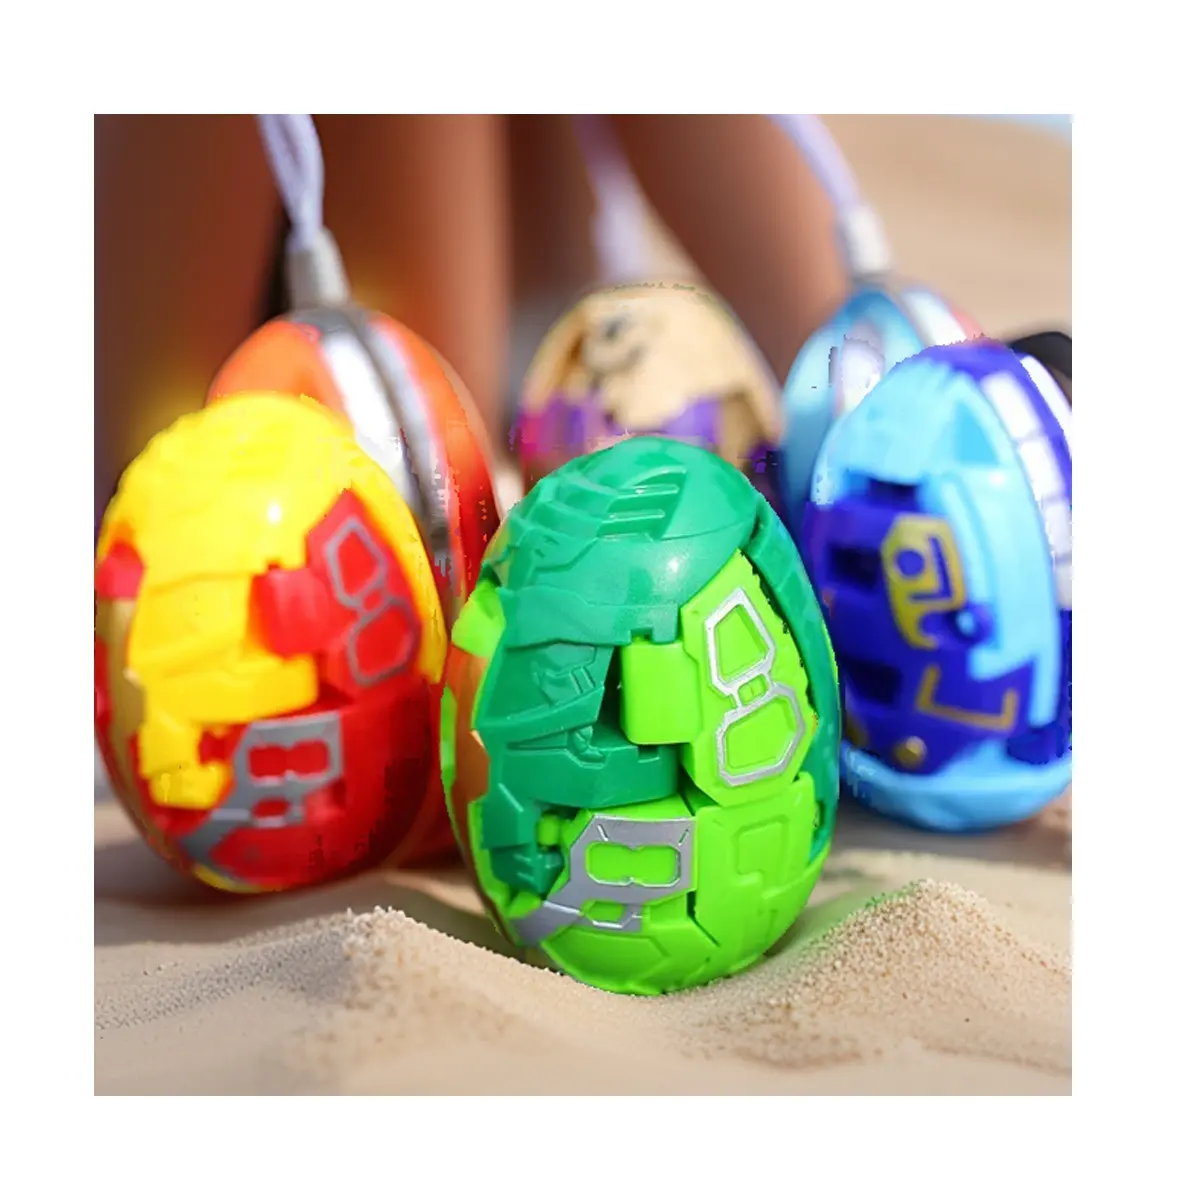 2024 NEW Dinosaur Transforming Robot Toy,2 in 1 Transformed Dinosaur Eggs Figure Toy,12 Pack Dinosaur Action Robot Gift Toy